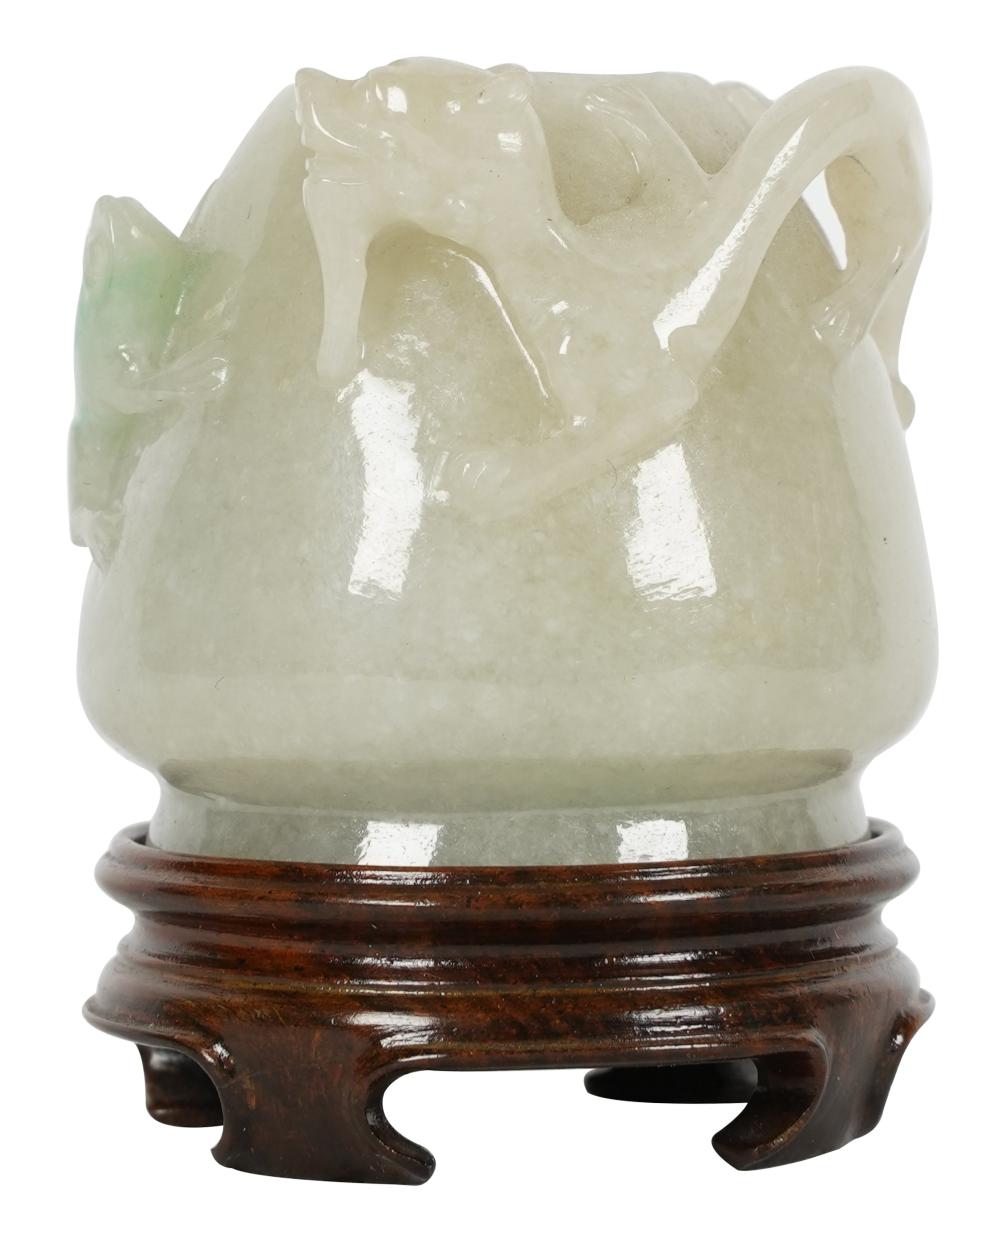 SMALL CHINESE CARVED JADE VASEon